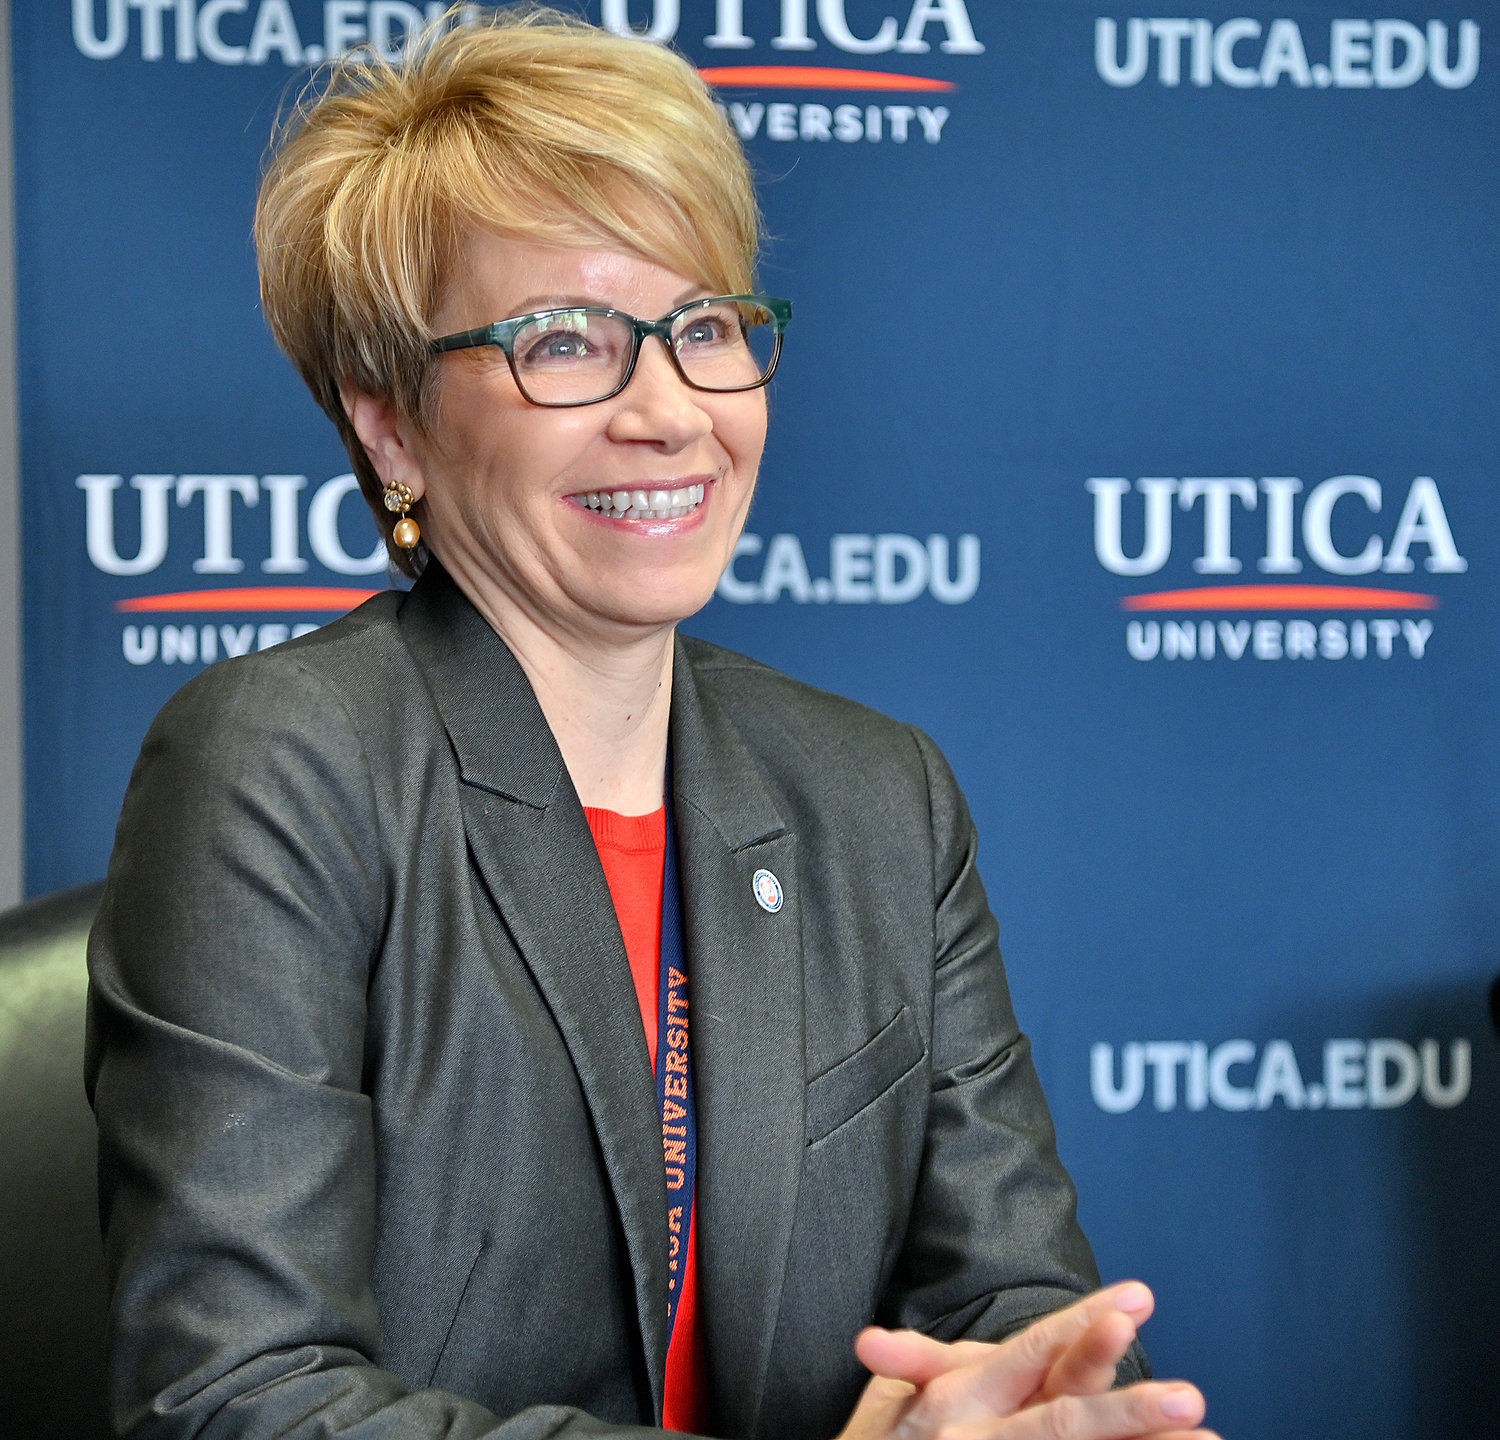 Retiring Utica University President Laura Casamento smiles Monday, Feb 27 during the announcement that Todd Pfannestiel will succeed her as the 10th university president.